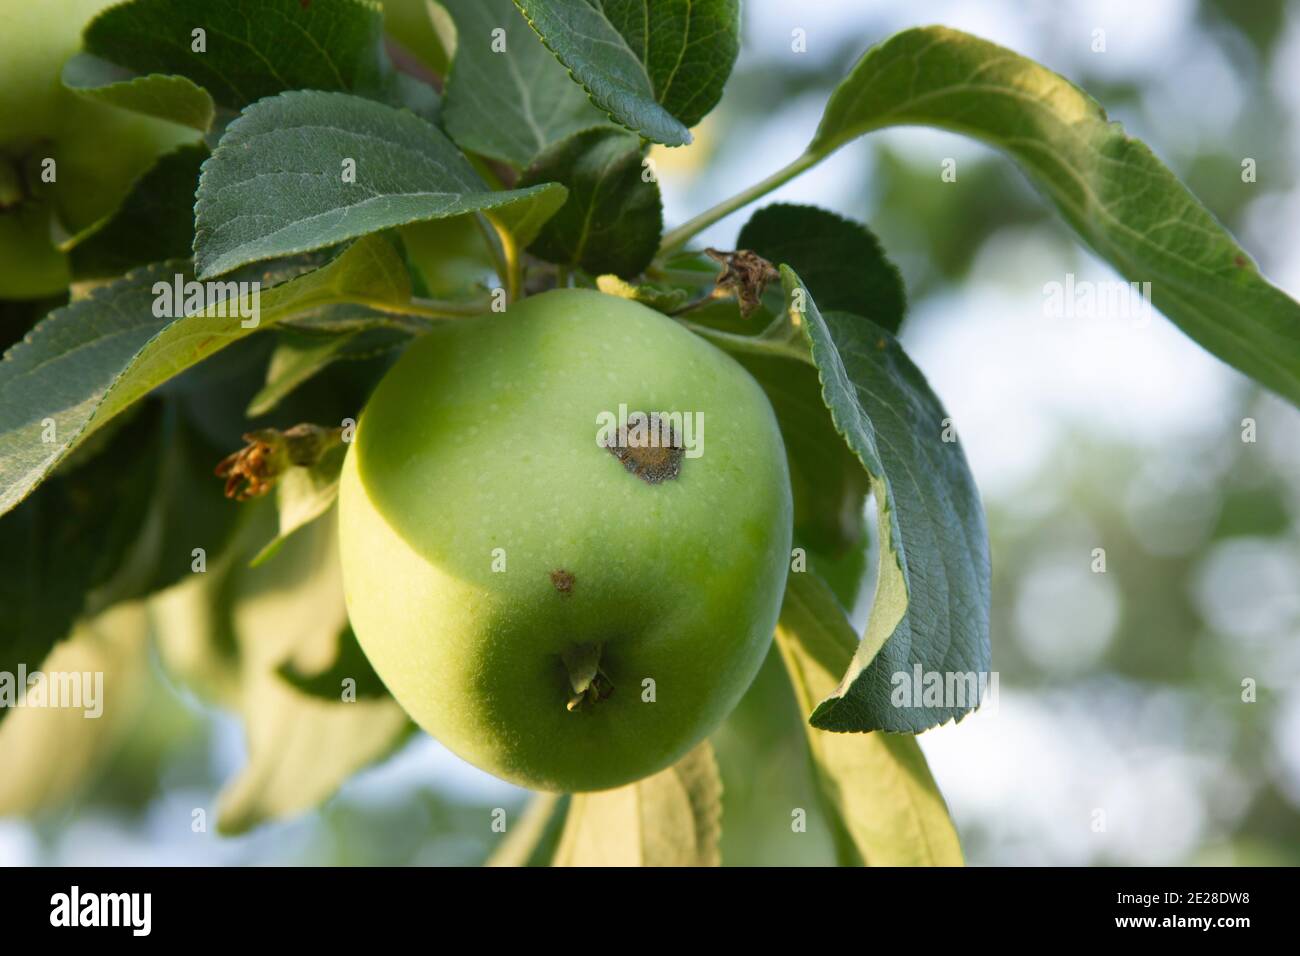 Apple scab. Venturia inaequalis. Apple-tree disease. Fruit damaged by pathogens on the tree.  Agriculture problems. Crop loss. Close-up Stock Photo